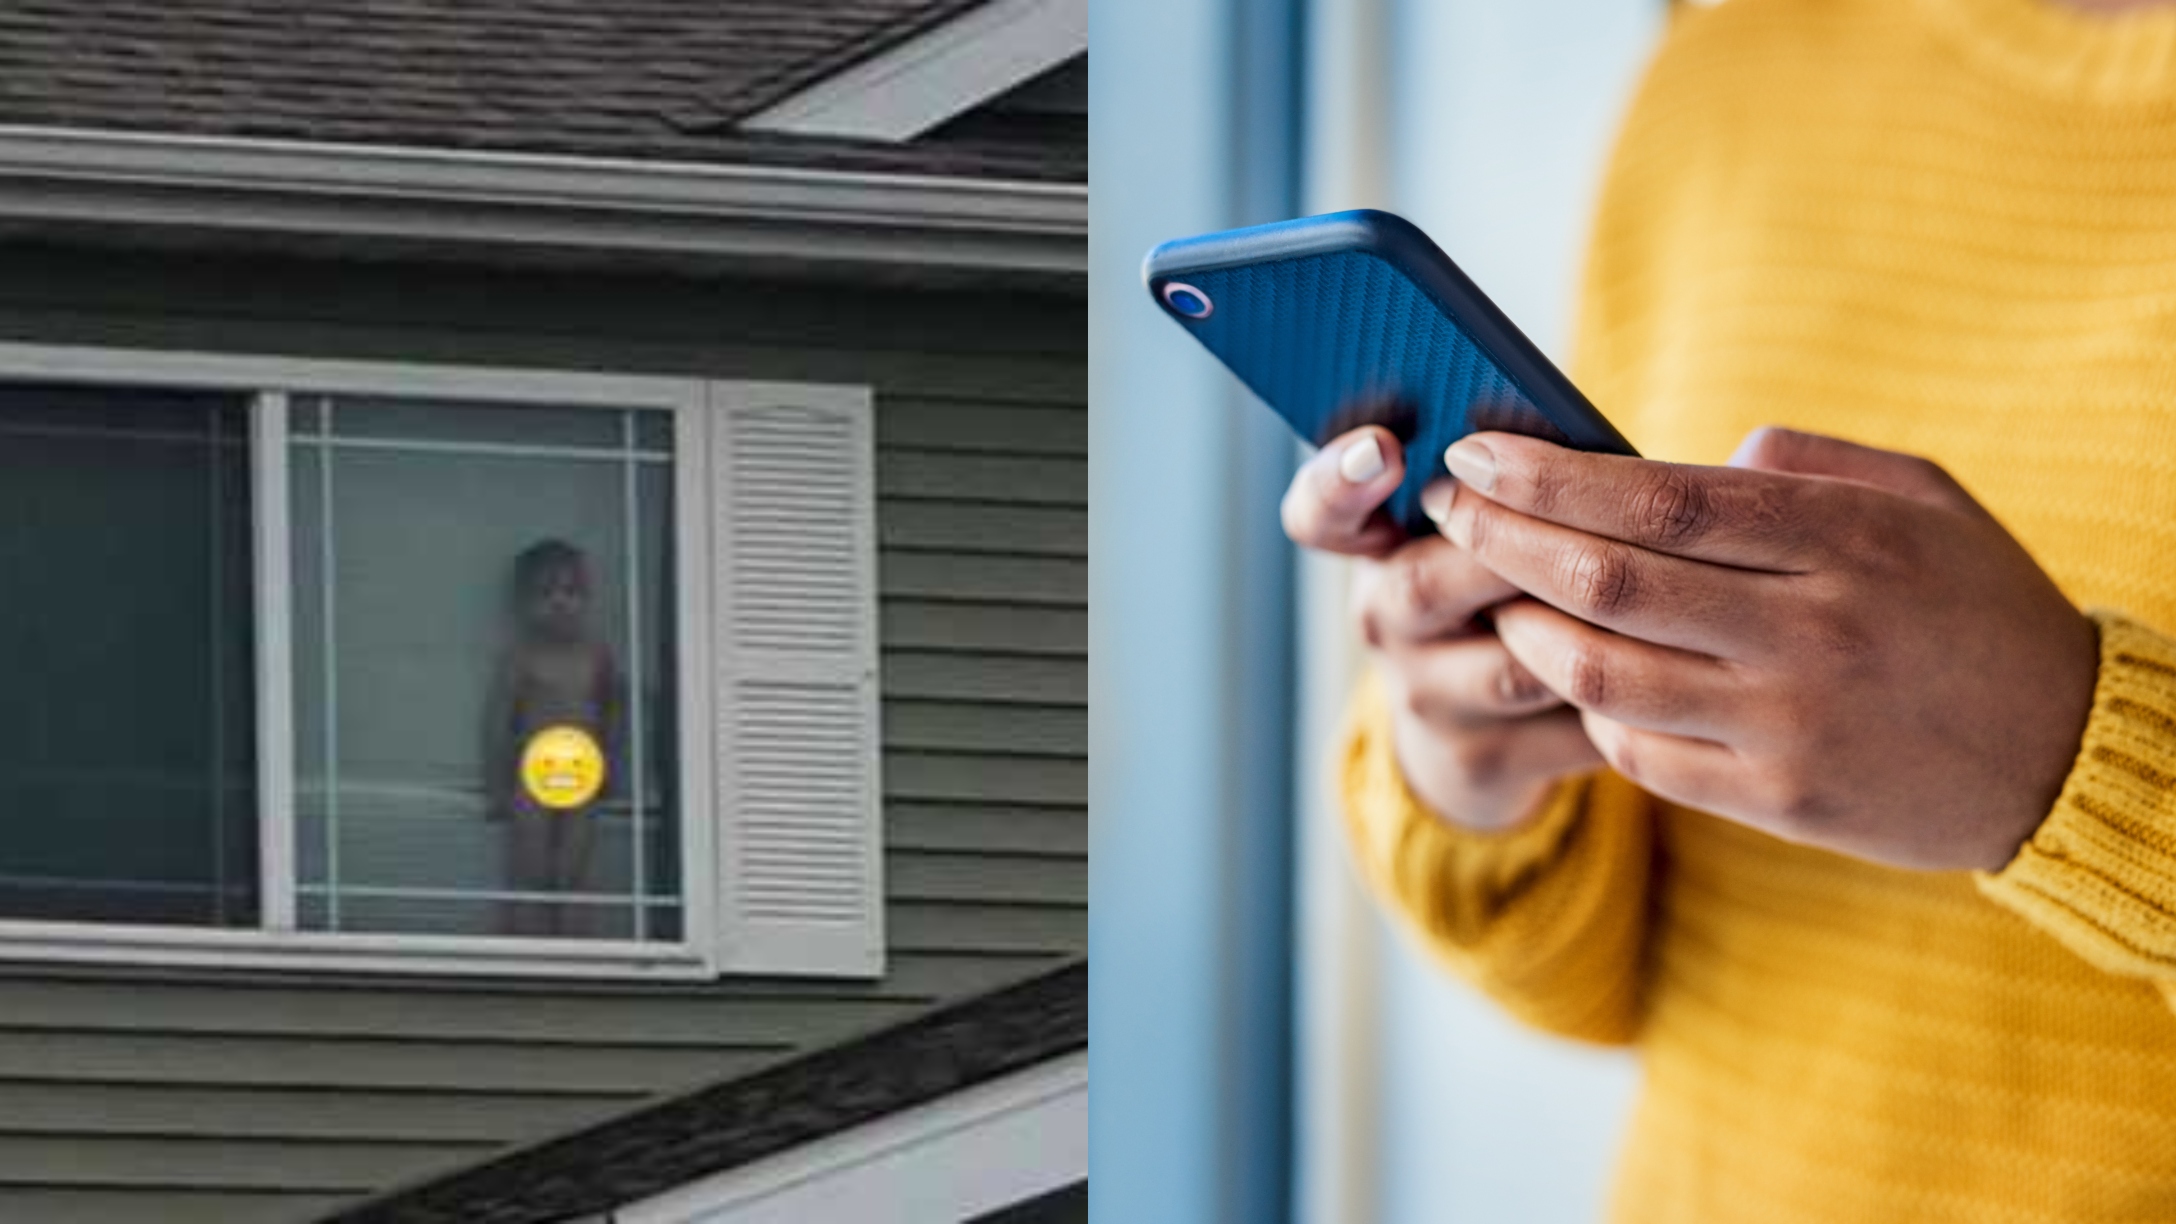 Mom Gets the Ultimate Text From Her Neighbor: 'Your Kid Is Naked in Your Window'